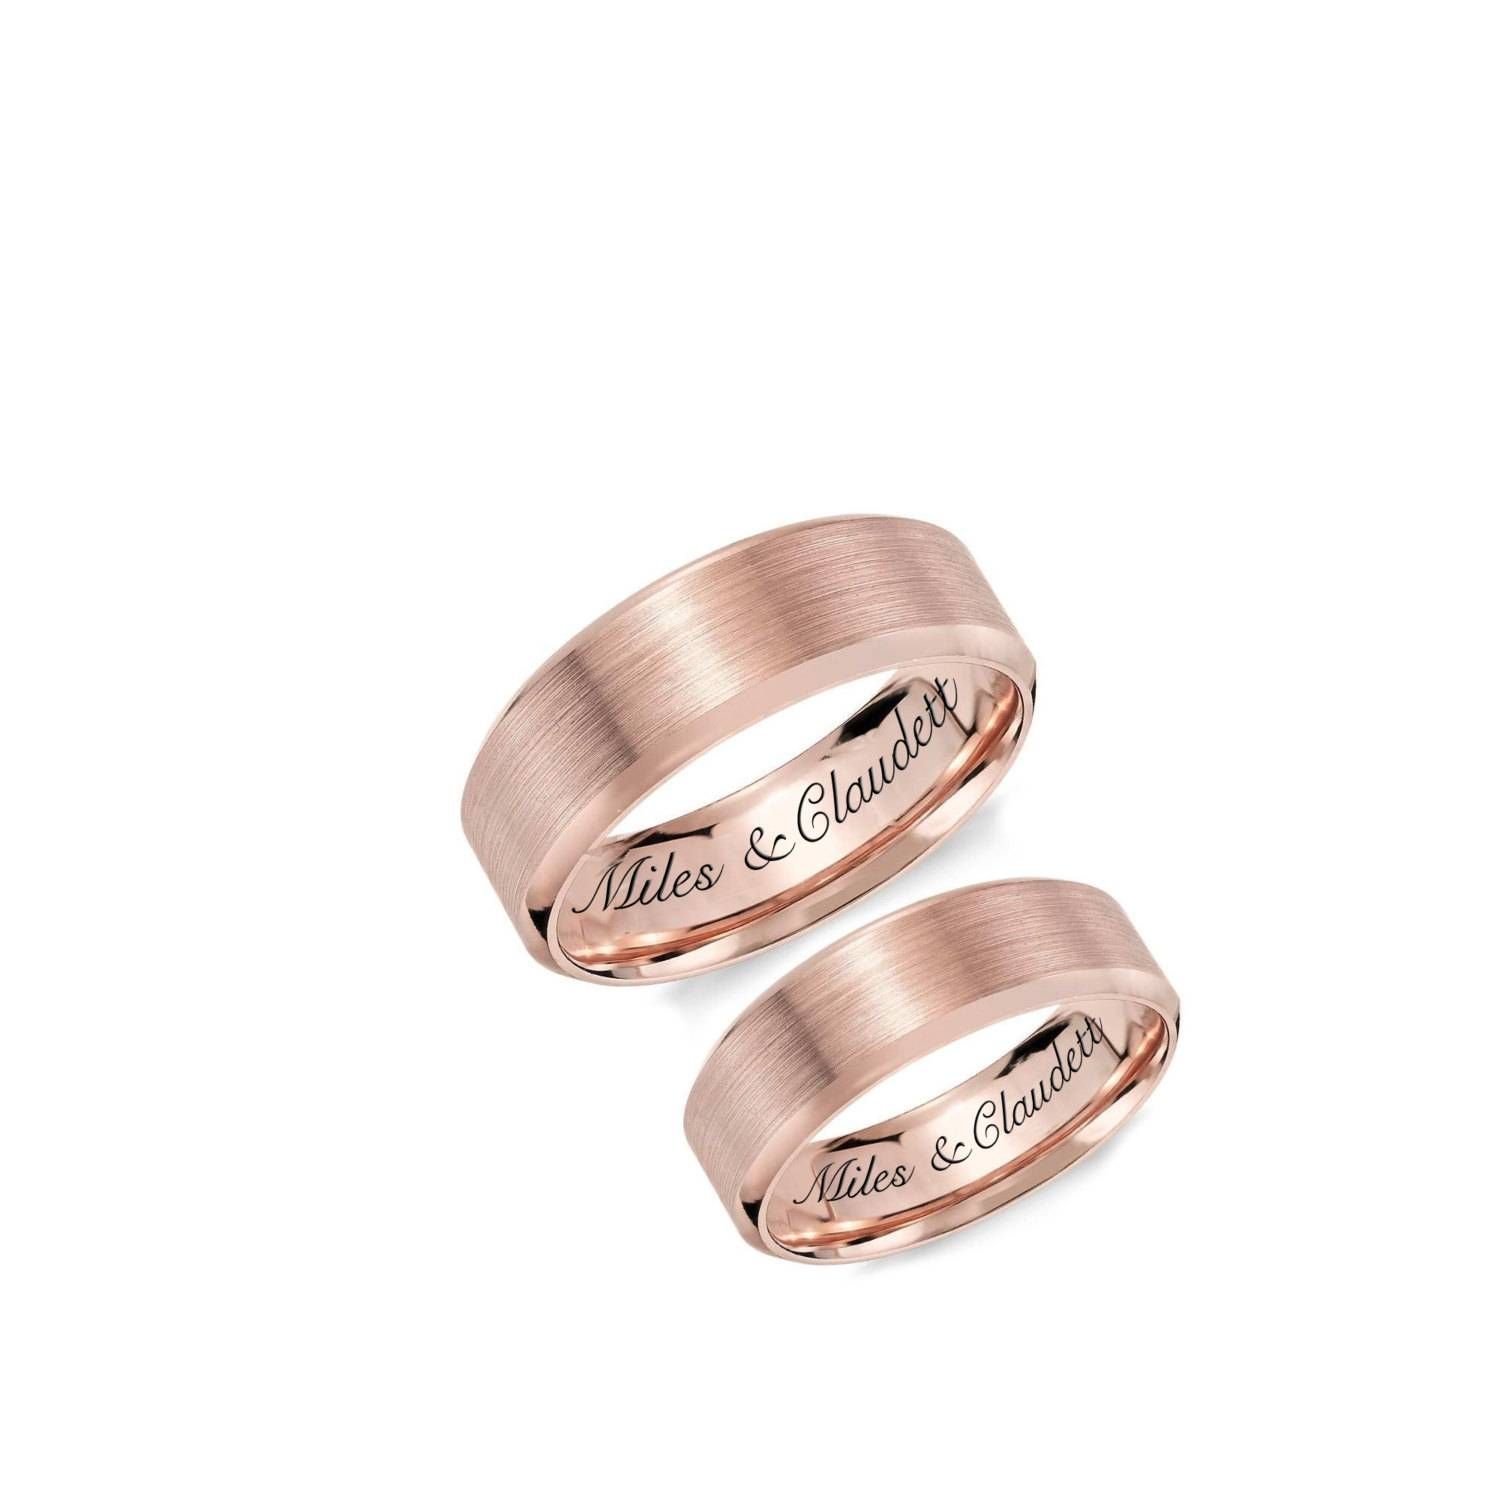 Personalized Rings Engraved Rings Rose Gold Ring Set Throughout 2018 Engraving Anniversary Rings (View 1 of 25)